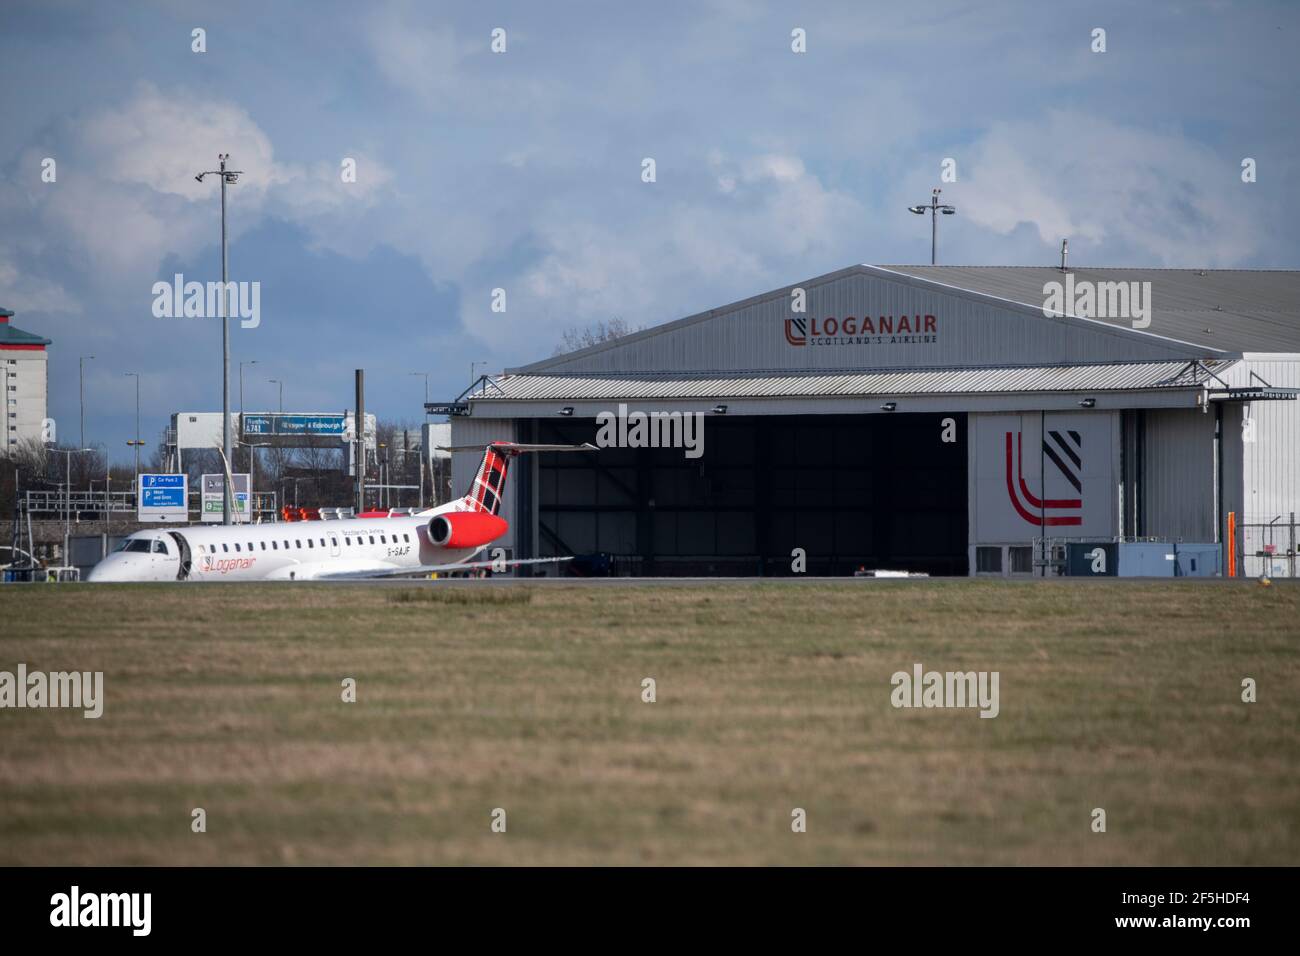 Glasgow, Scotland, UK. 26th Mar, 2021. PICTURED: Loganair Embraer 145 aircraft seen outside of its Glasgow based ops with the Loganair hangar in the background. The company is keeping its aircraft regularly maintained and flying throughout the pandemic. Credit: Colin Fisher/Alamy Live News Stock Photo